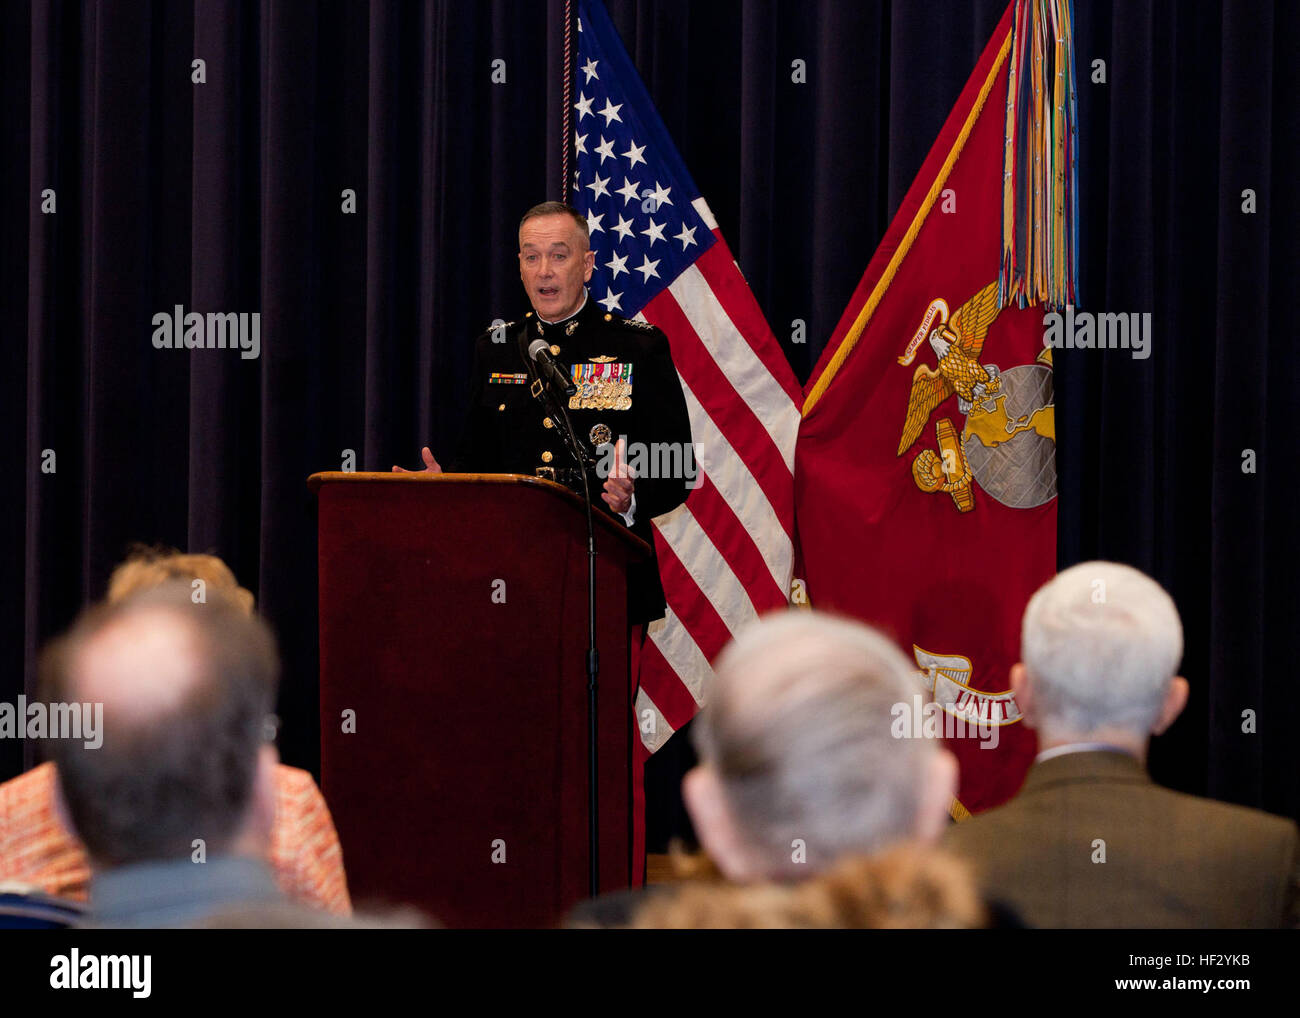 Commandant of the Marine Corps, Gen. Joseph F. Dunford, Jr., speaks during an Iwo Jima reunion at Marine Barracks Washington, D.C., Feb. 19, 2015. The event commemorated the 70th Anniversary of the Battle of Iwo Jima with veterans, families, dignitaries and service members. (U.S. Marine Corps photo by Cpl. Lauren L. Whitney/Released) 70th Iwo Jima Reunion 150219-M-GZ082-085 Stock Photo